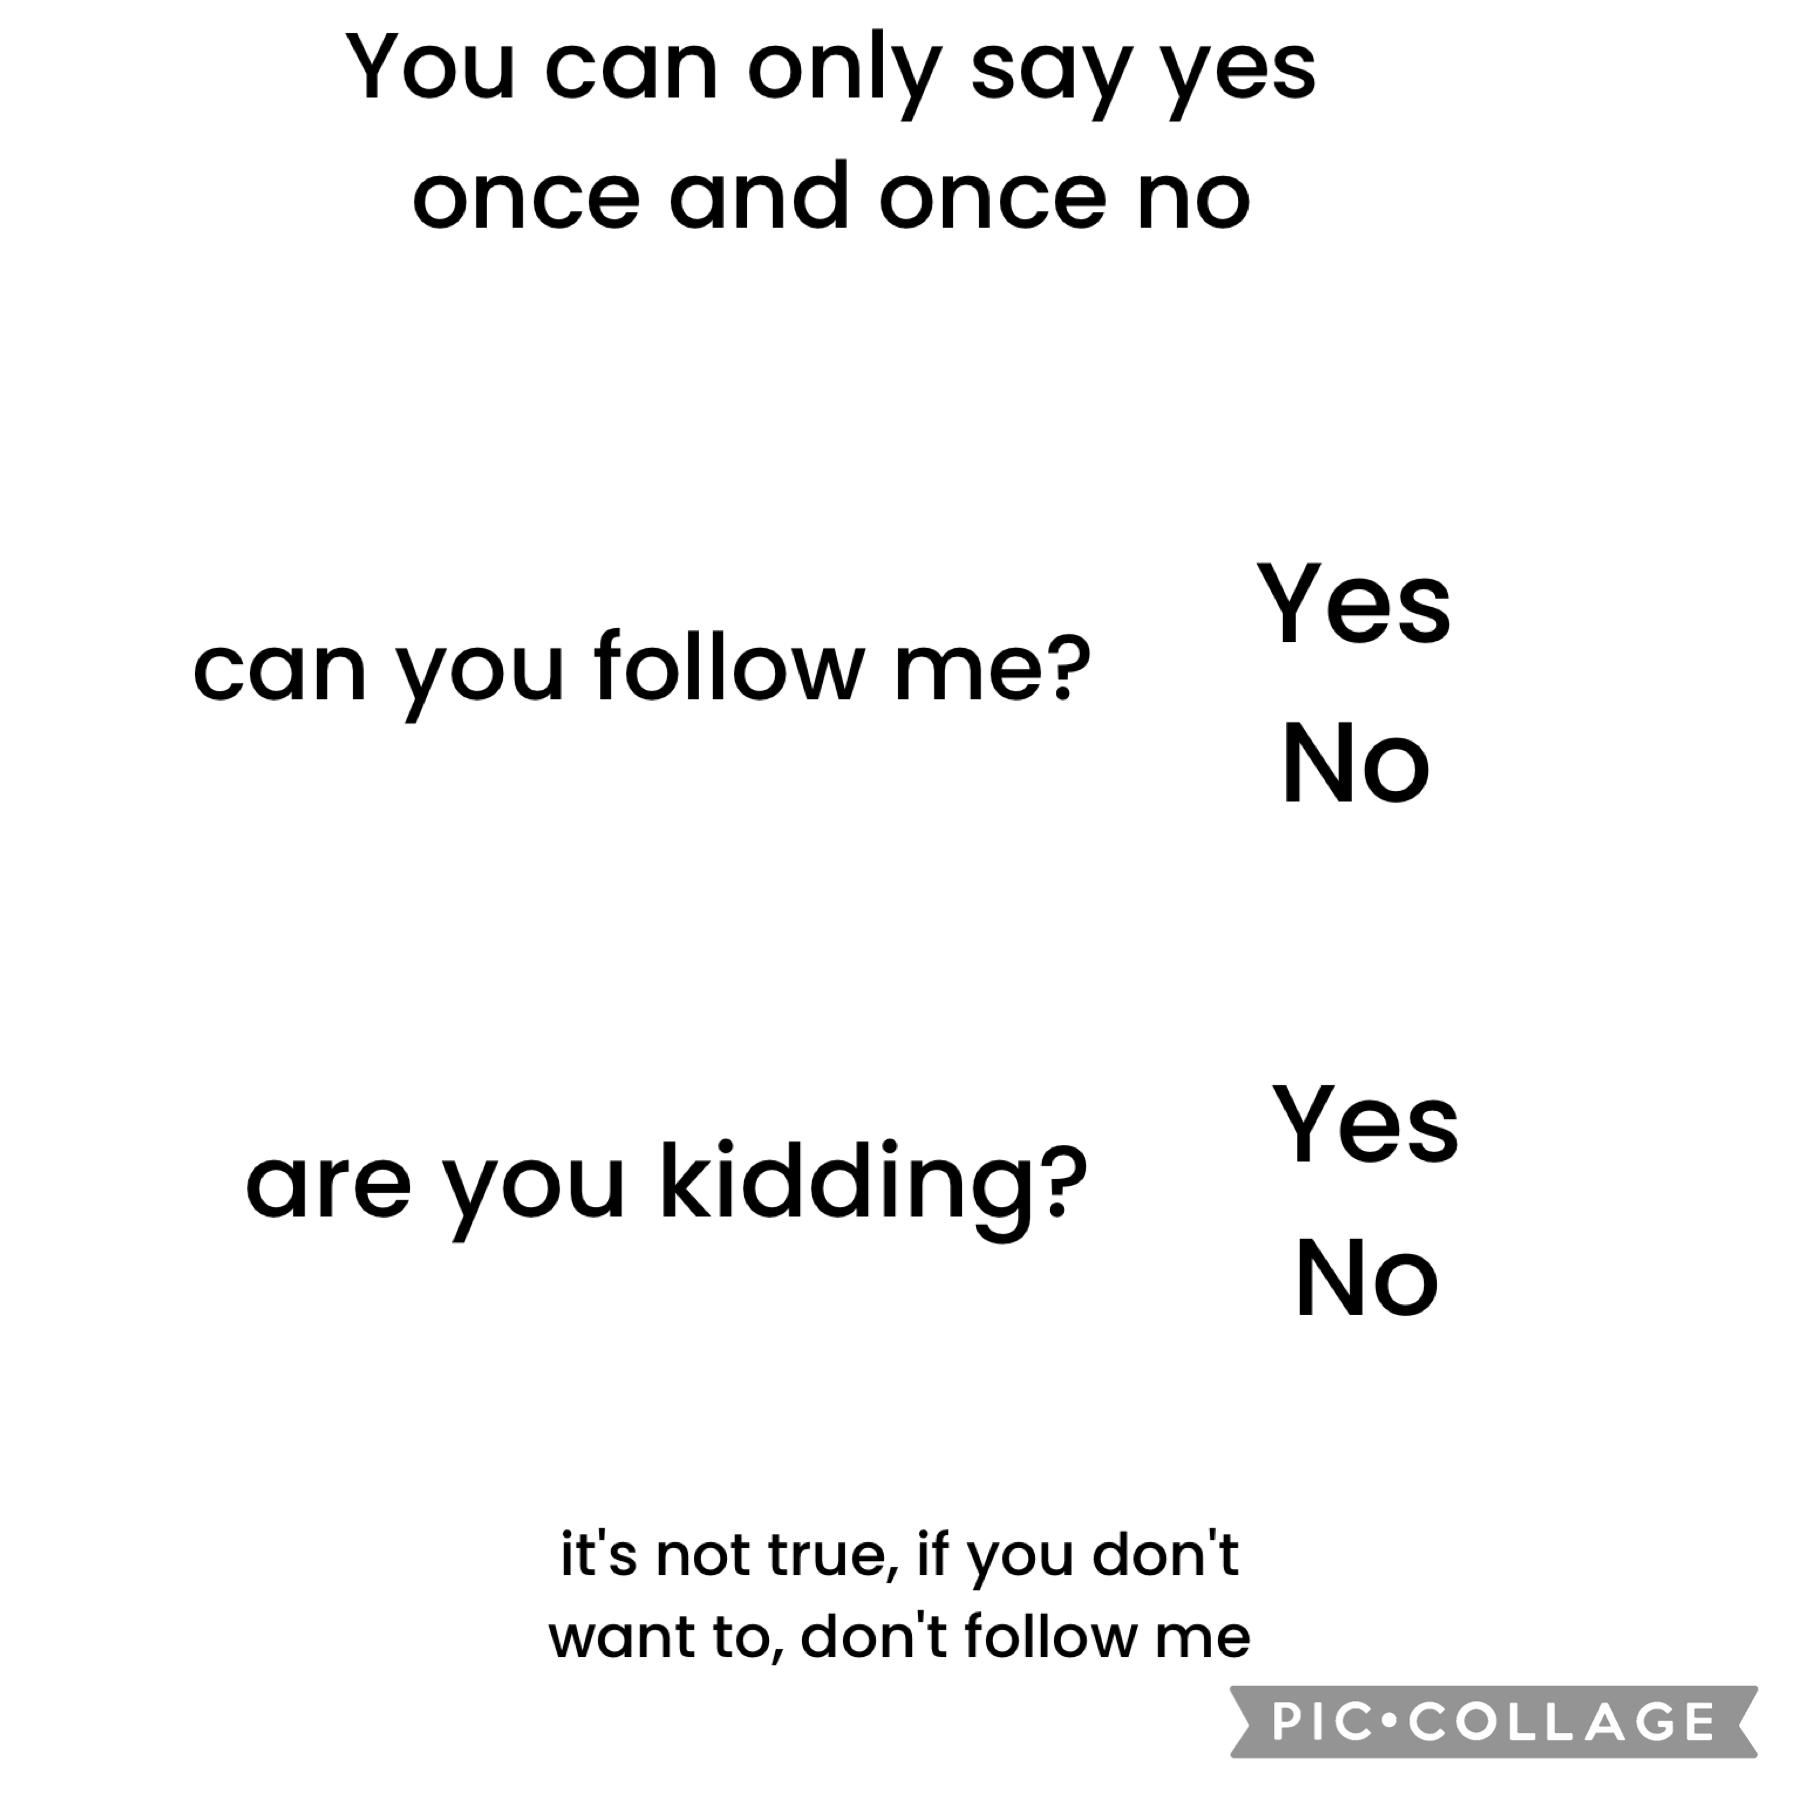 but if you want to follow me, please.